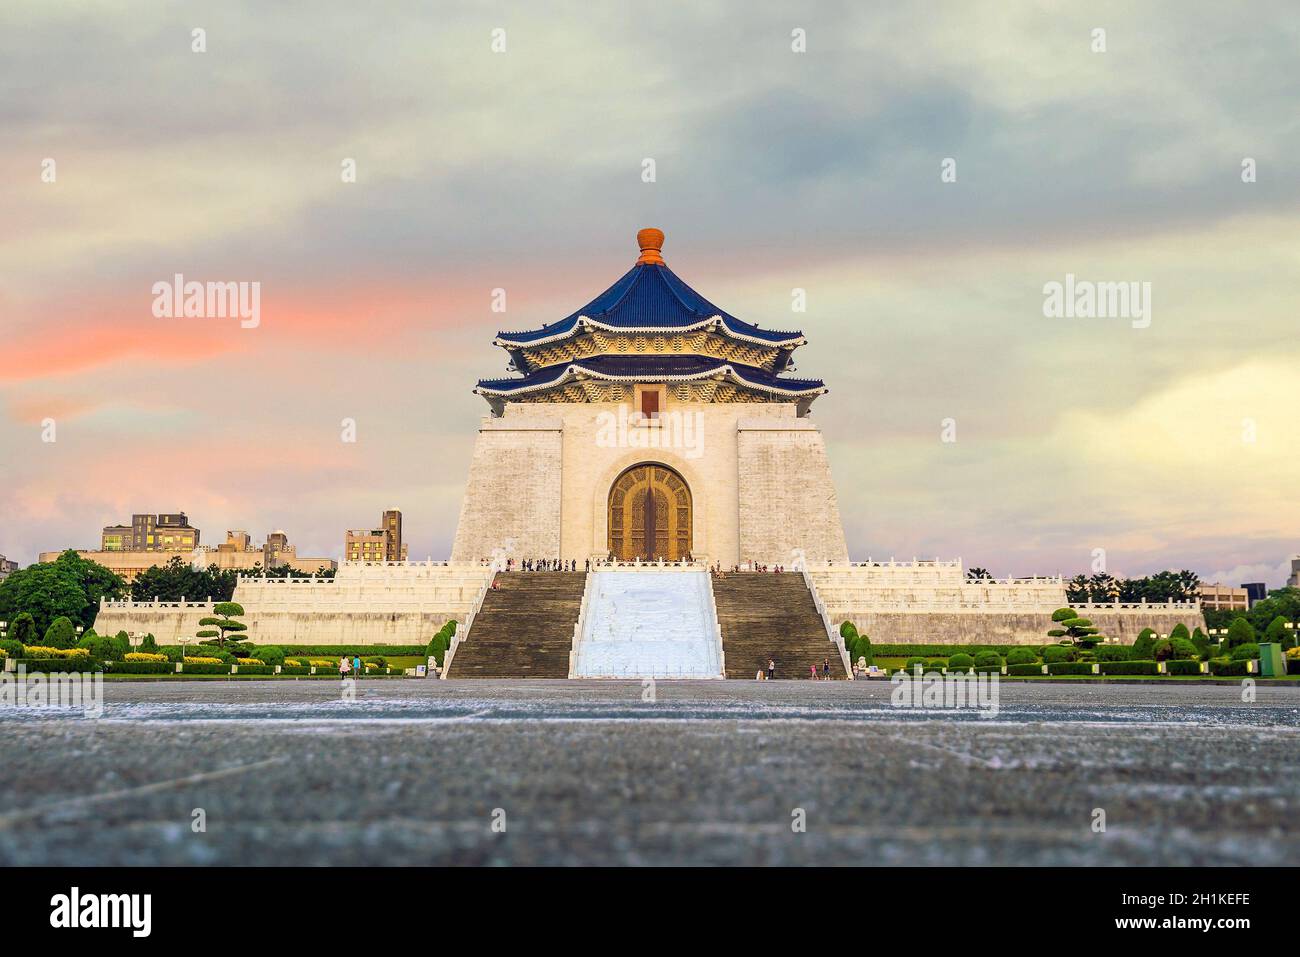 Chiang Kai-shek memorial in Taipei, Taiwan Chinese characters on the walls represent Chiang Kai-shek’s political values of ethics, democracy and scien Stock Photo